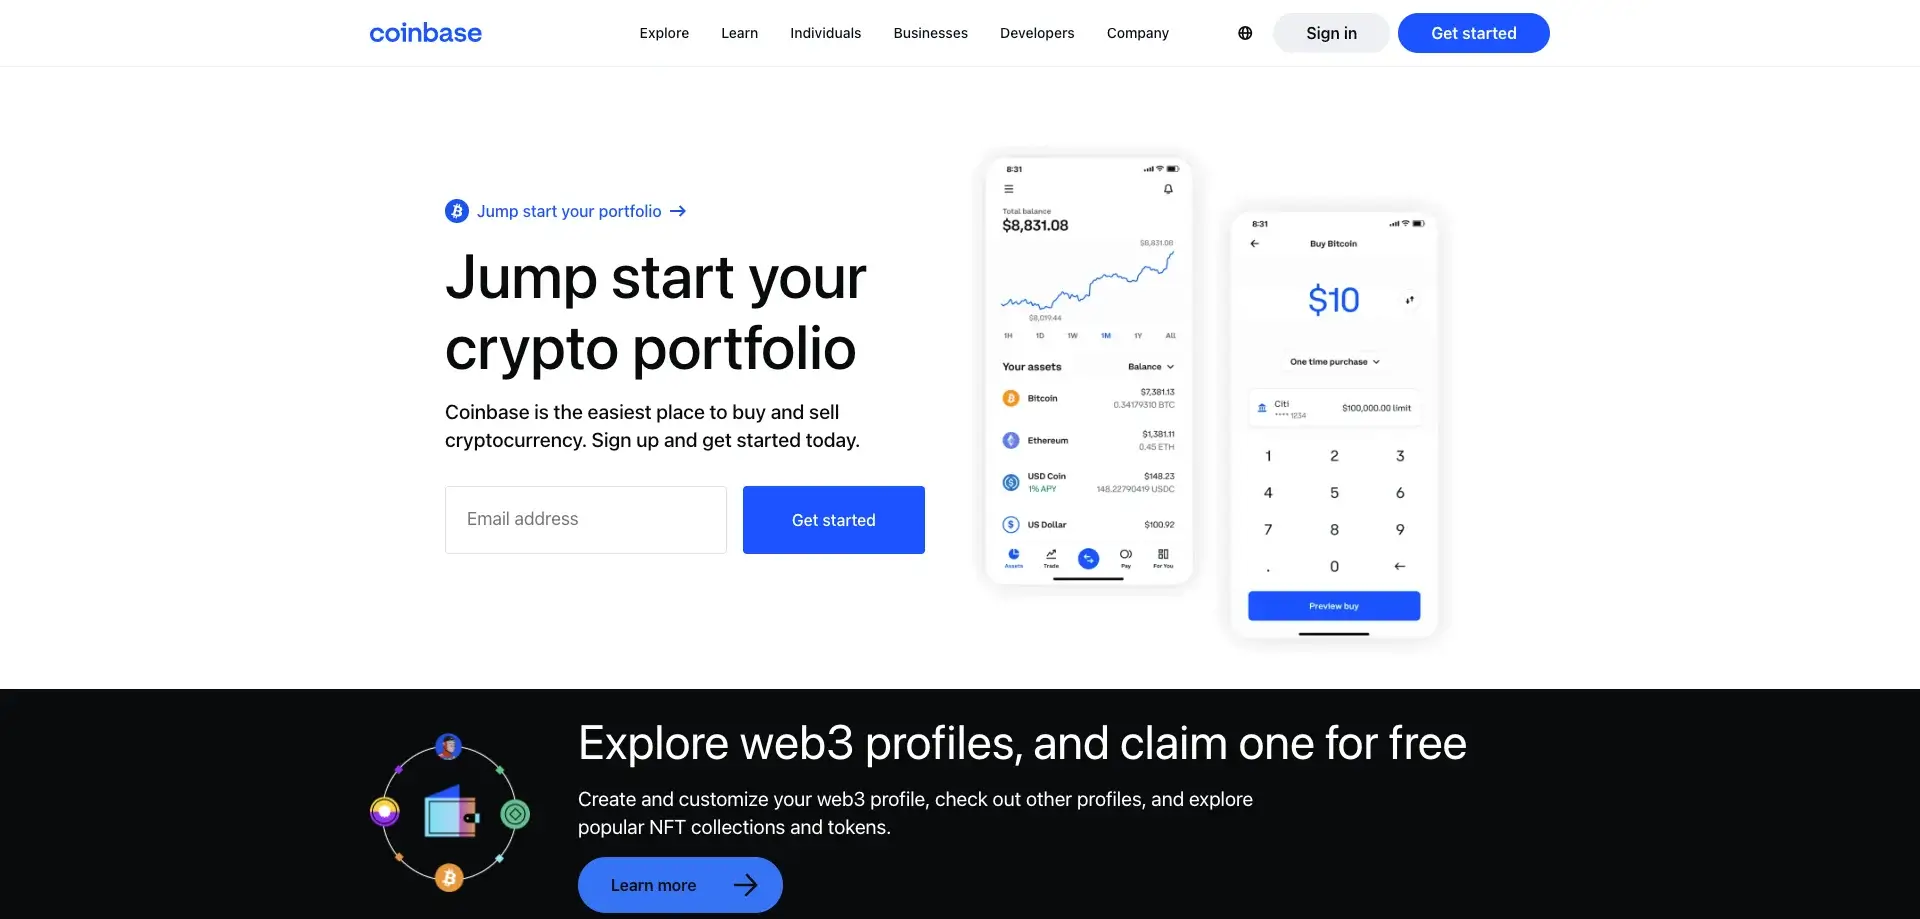 How to Sign up on Coinbase?